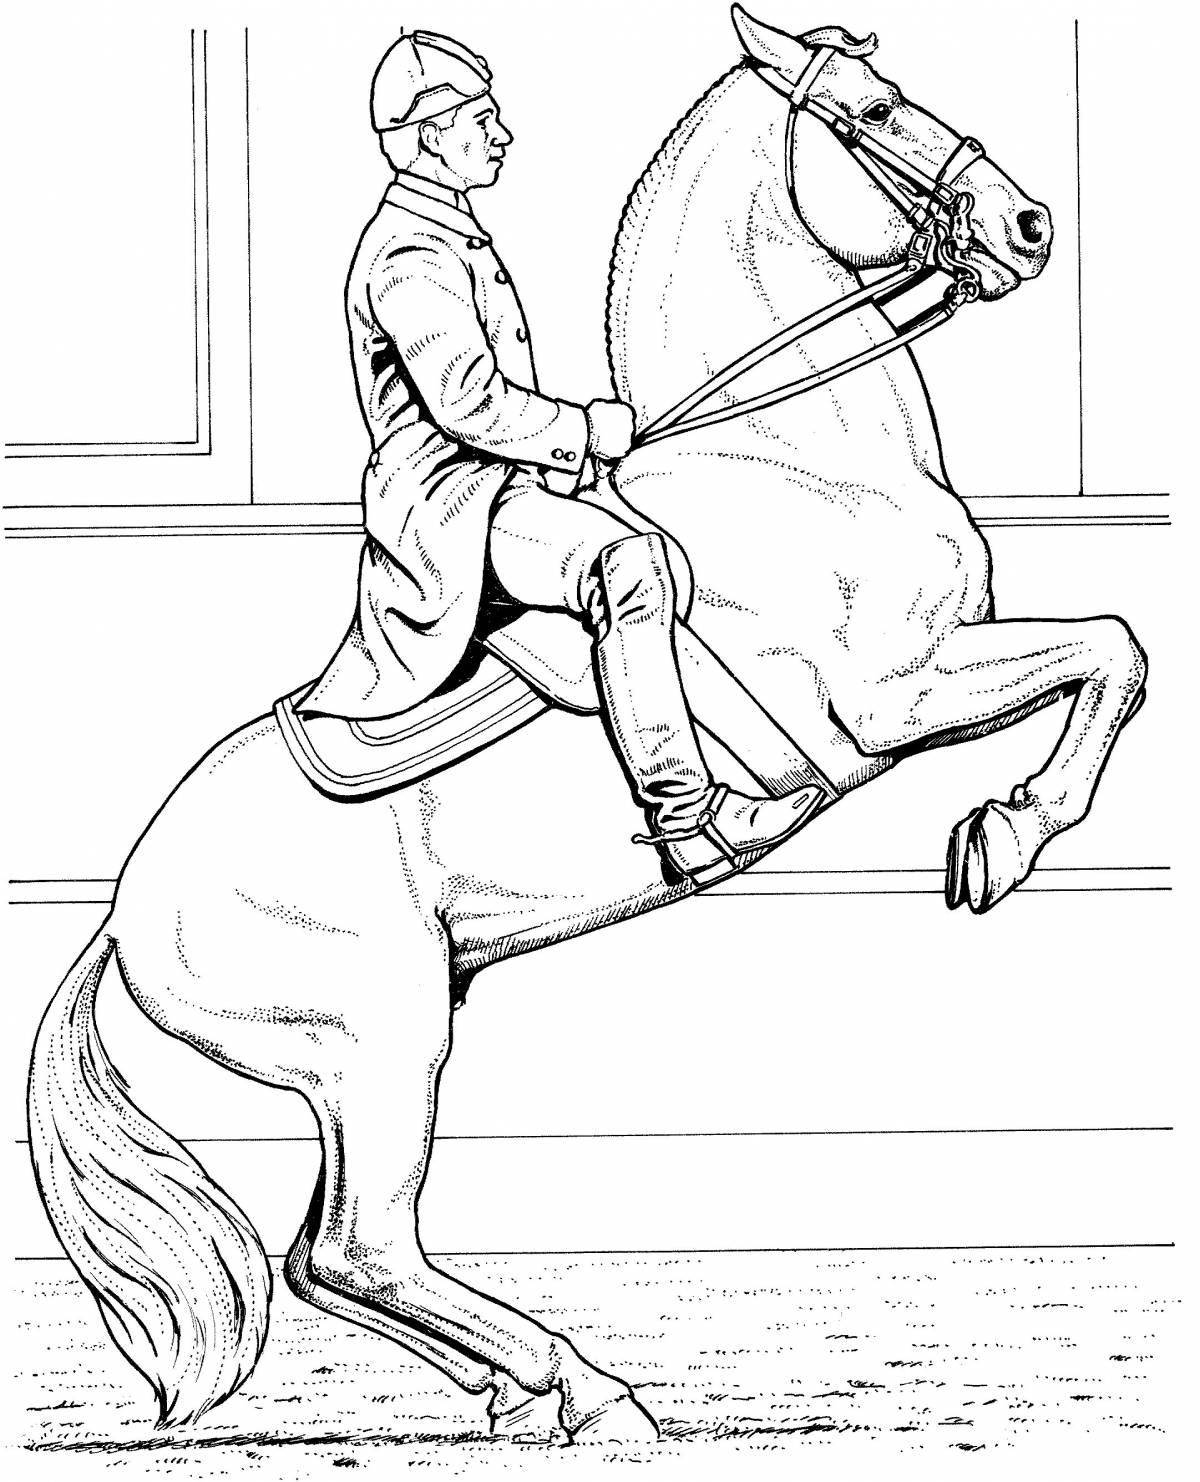 Coloring page of rearing horse